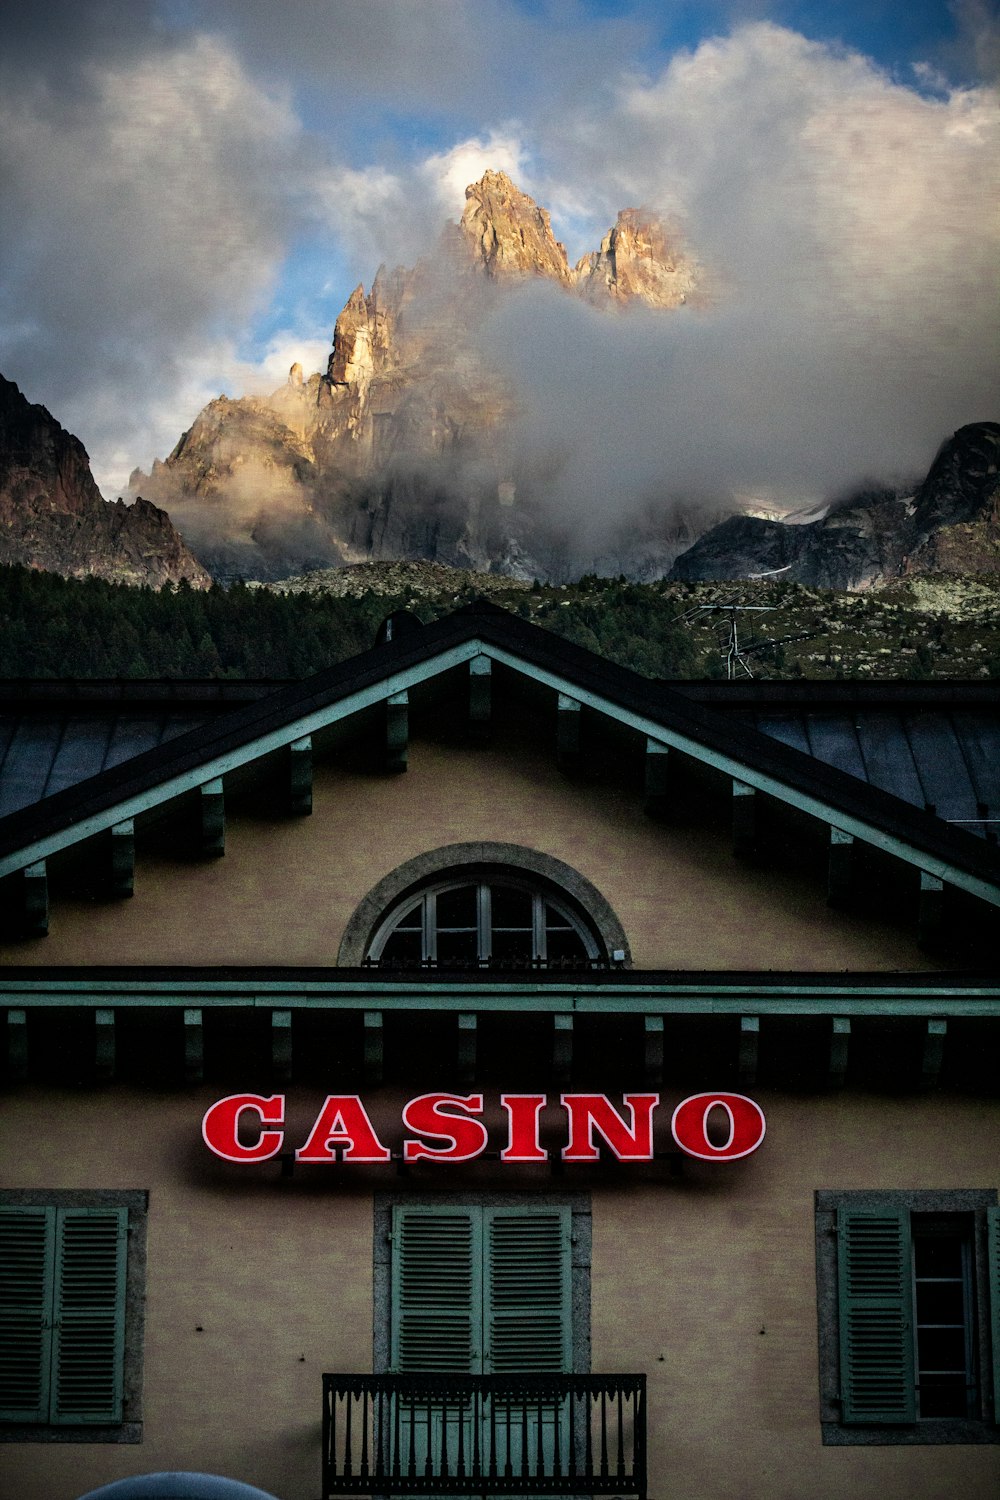 a building with a casino sign and mountains in the background